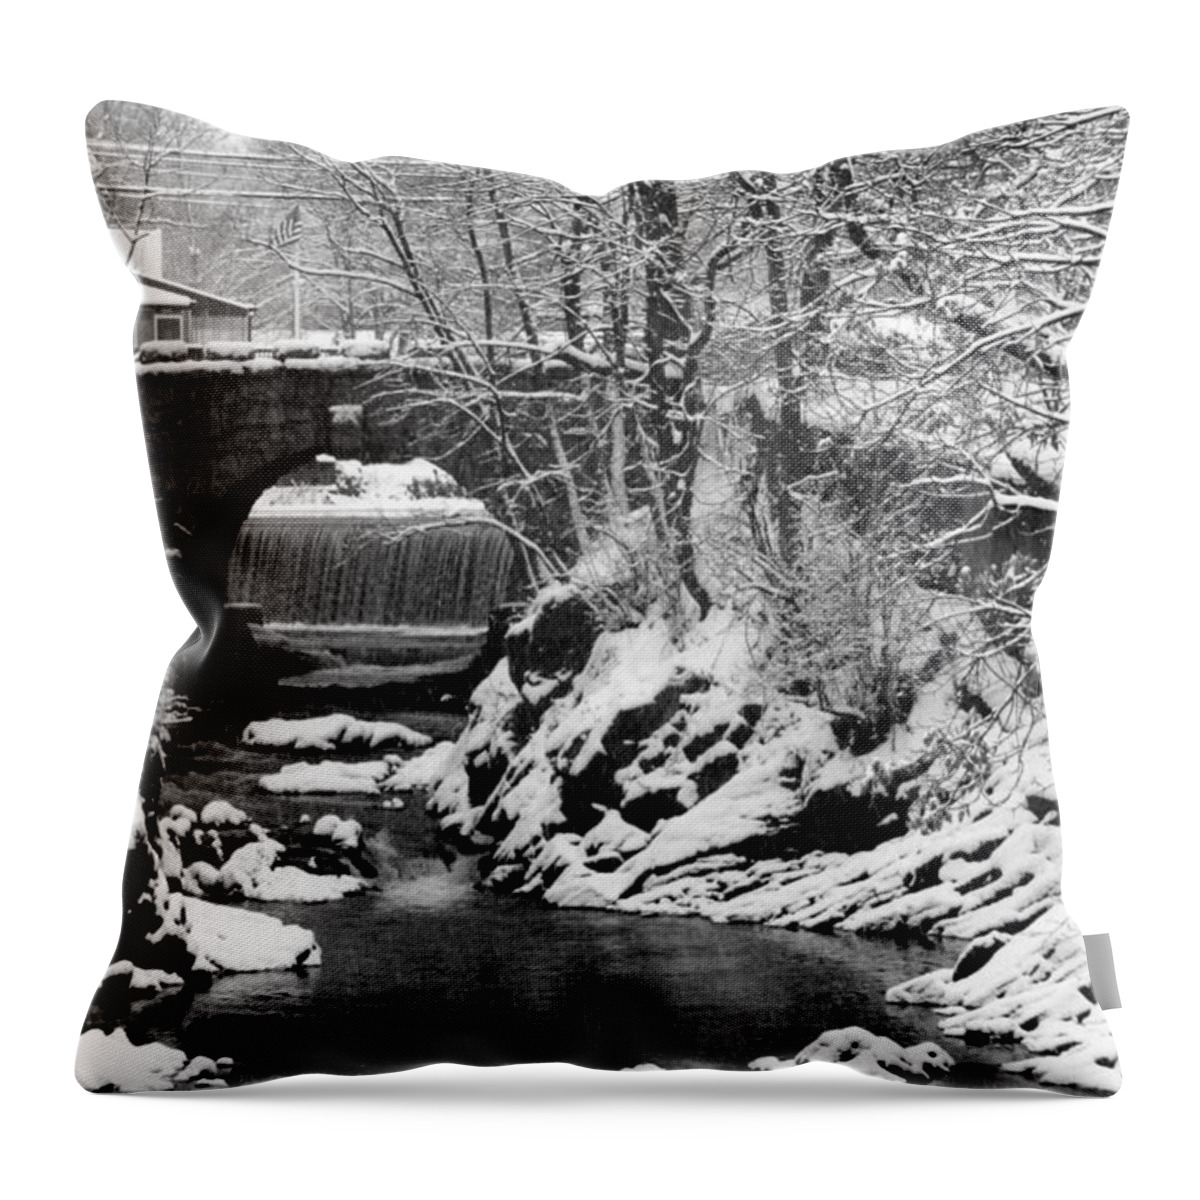 Water Throw Pillow featuring the photograph Stone-bridge by John Scates